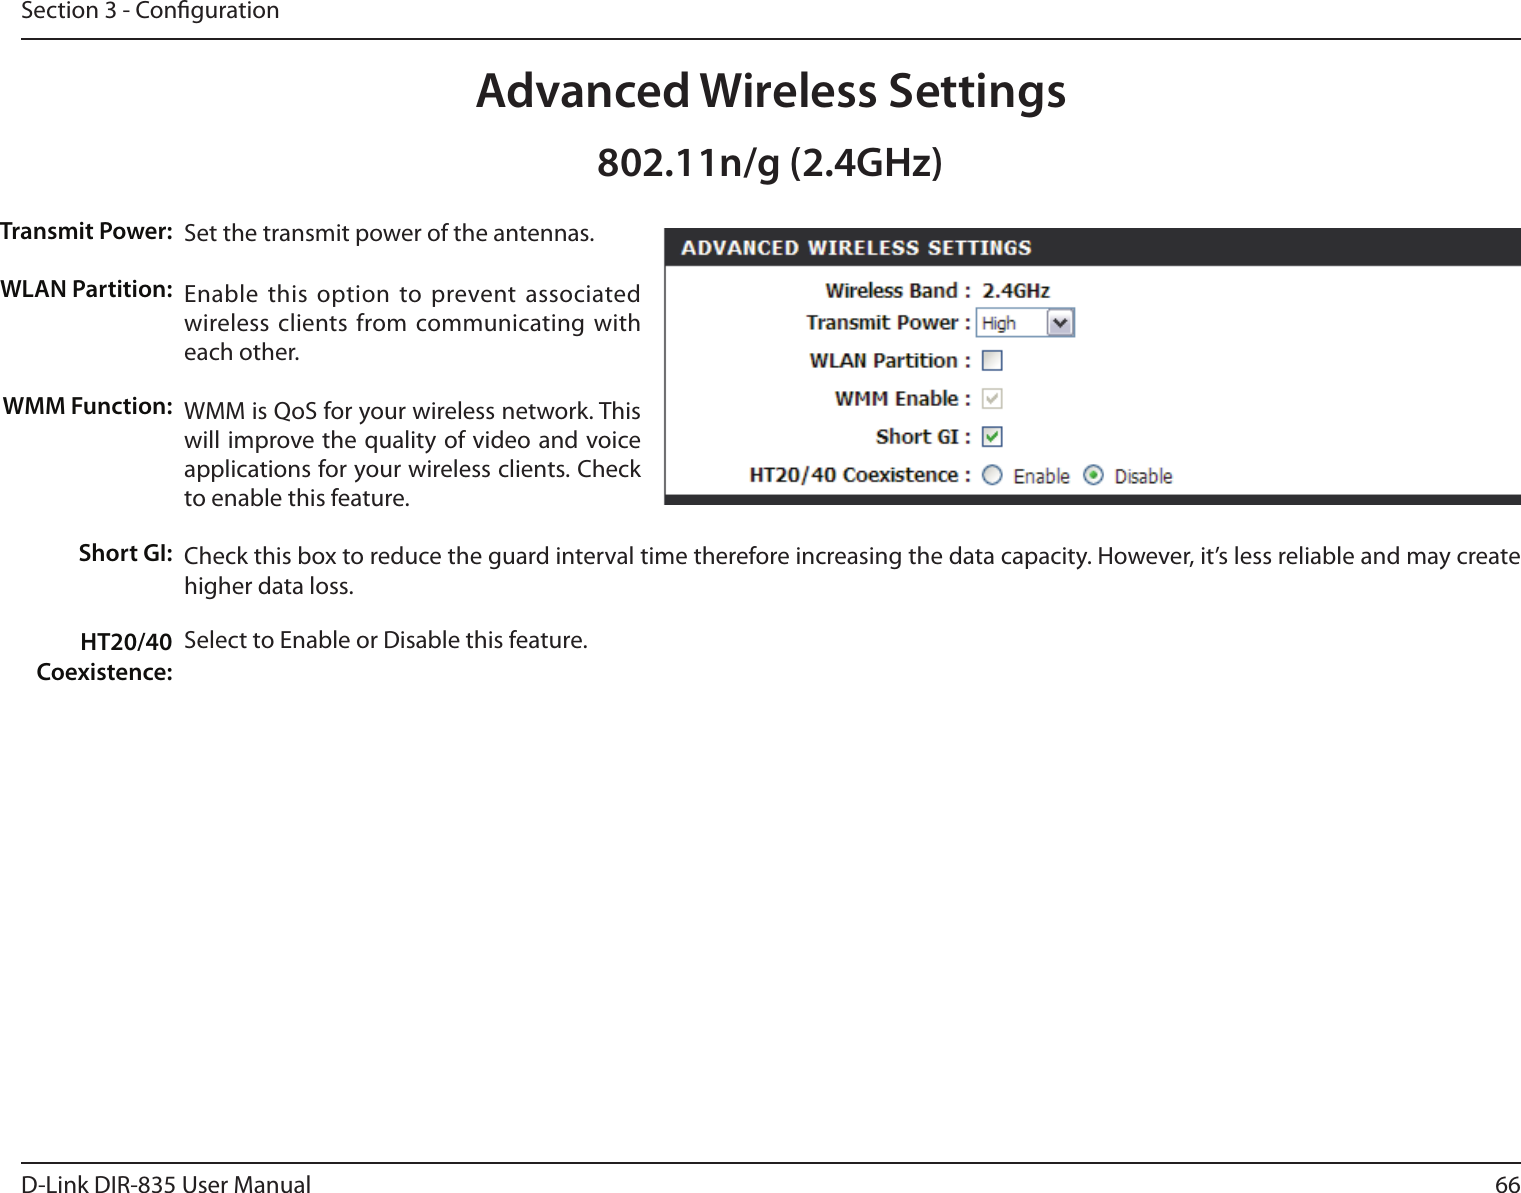 66D-Link DIR-835 User ManualSection 3 - CongurationSet the transmit power of the antennas.Enable this  option to  prevent associated wireless clients from communicating with each other.WMM is QoS for your wireless network. This will improve the quality of video and voice applications for your wireless clients. Check to enable this feature. Check this box to reduce the guard interval time therefore increasing the data capacity. However, it’s less reliable and may create higher data loss.Select to Enable or Disable this feature.Transmit Power:WLAN Partition:WMM Function:Short GI:HT20/40 Coexistence:Advanced Wireless Settings802.11n/g (2.4GHz)